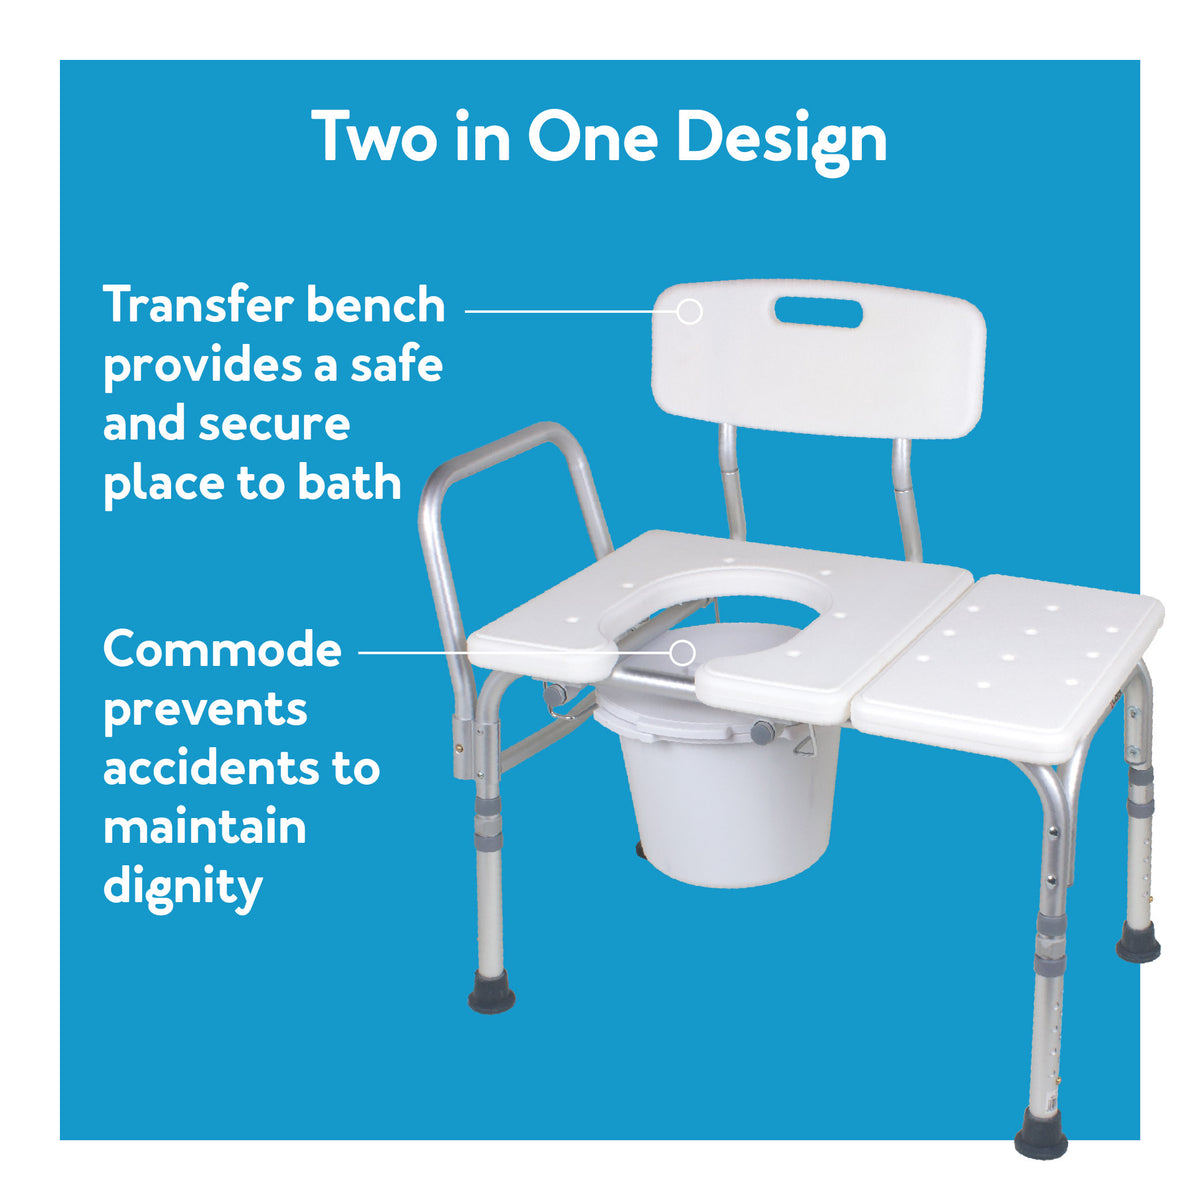 A white transfer bench on a blue background with text explaining features